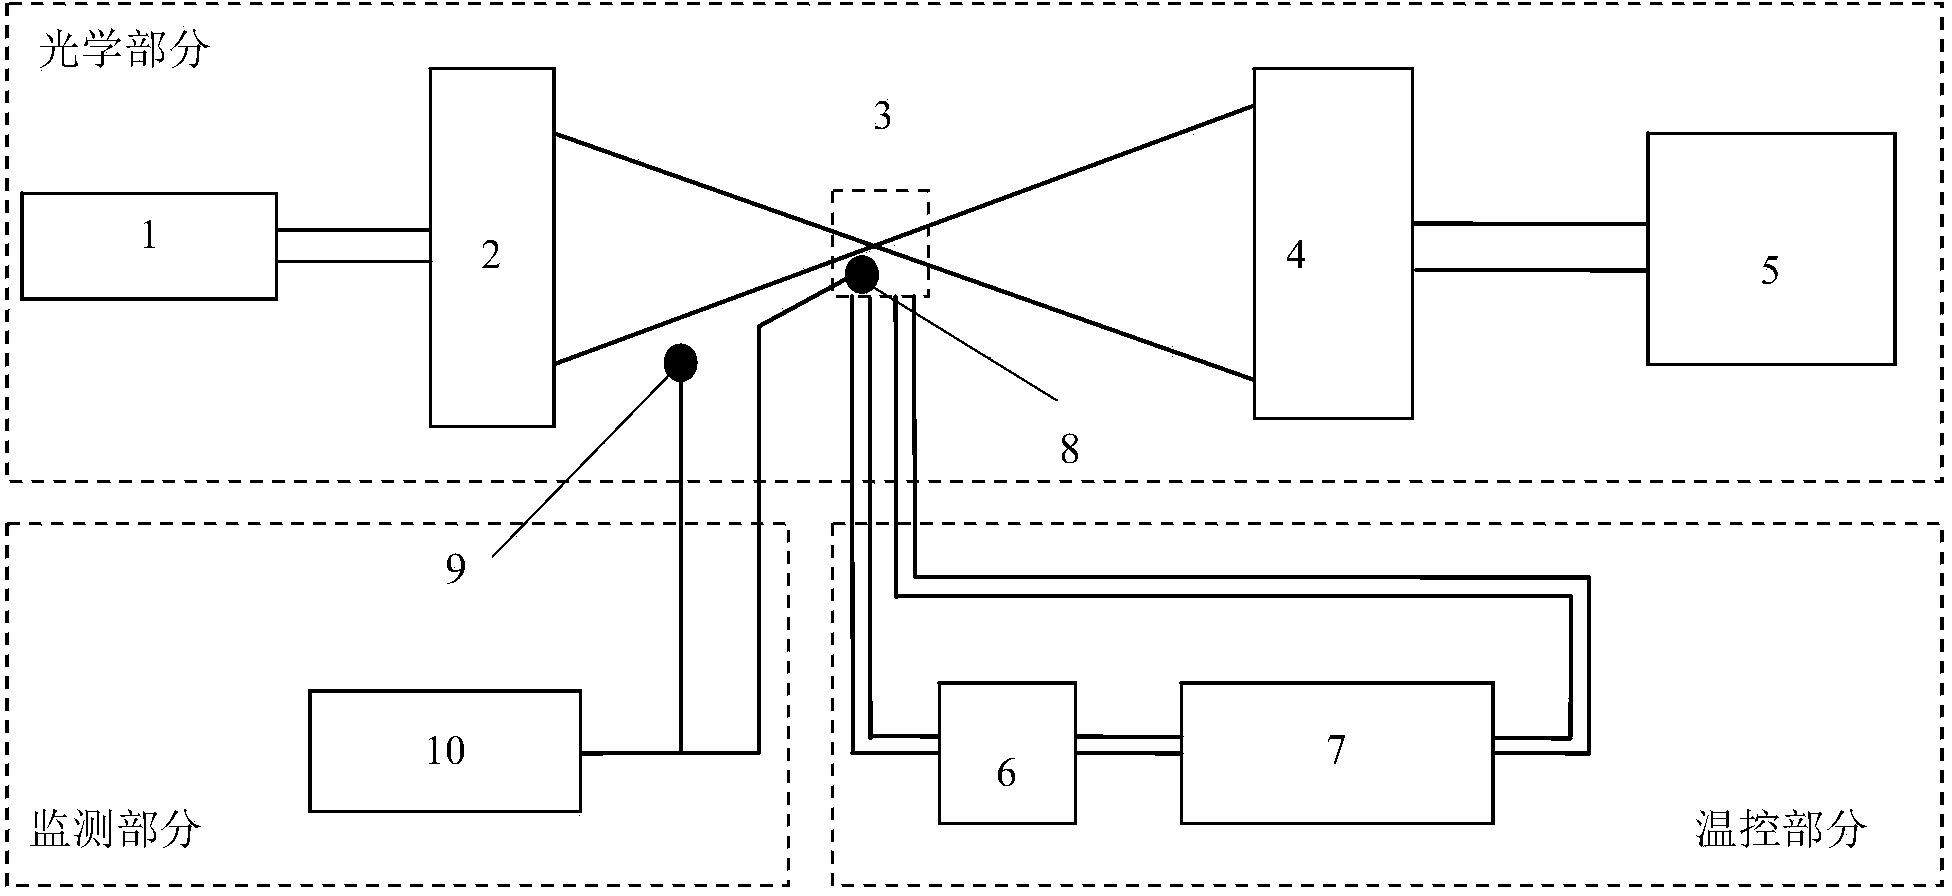 Calibration device for solar telescope heat field diaphragm internal seeing effect